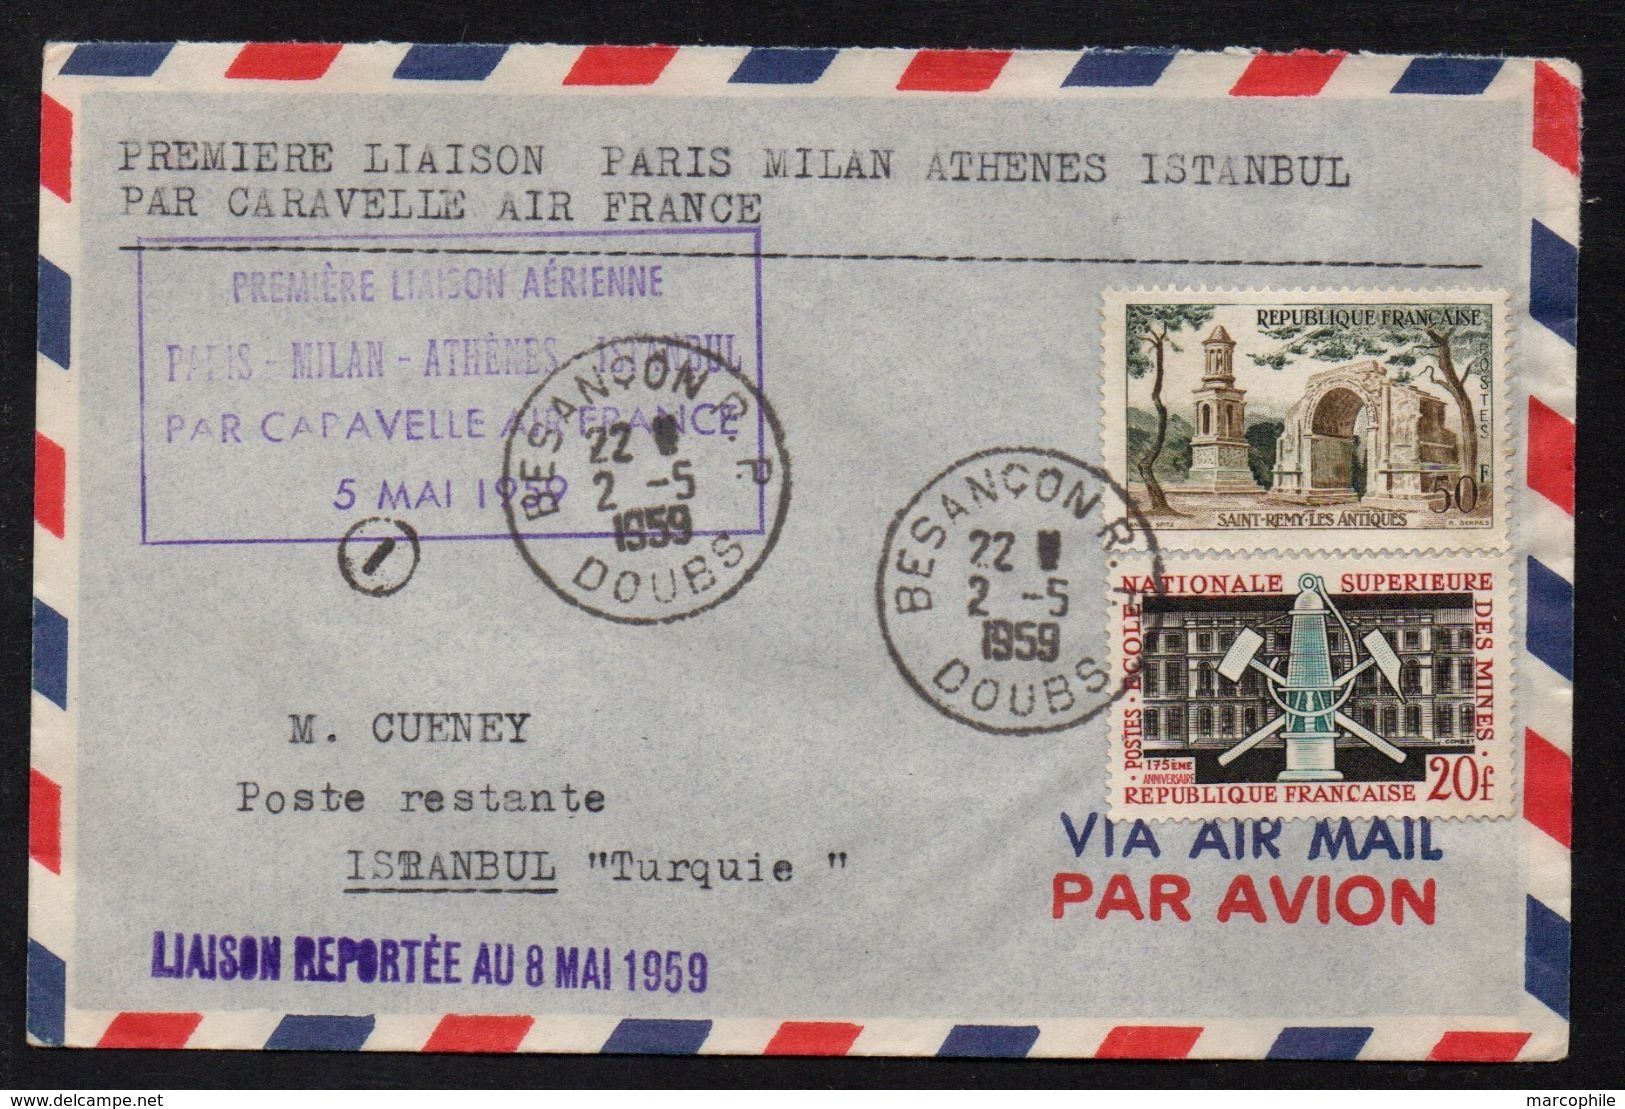 PREMIER VOL PARIS - ISTANBUL /1959 LETTRE - FFC - FIRST FLIGHT COVER (ref 7566a) - Covers & Documents